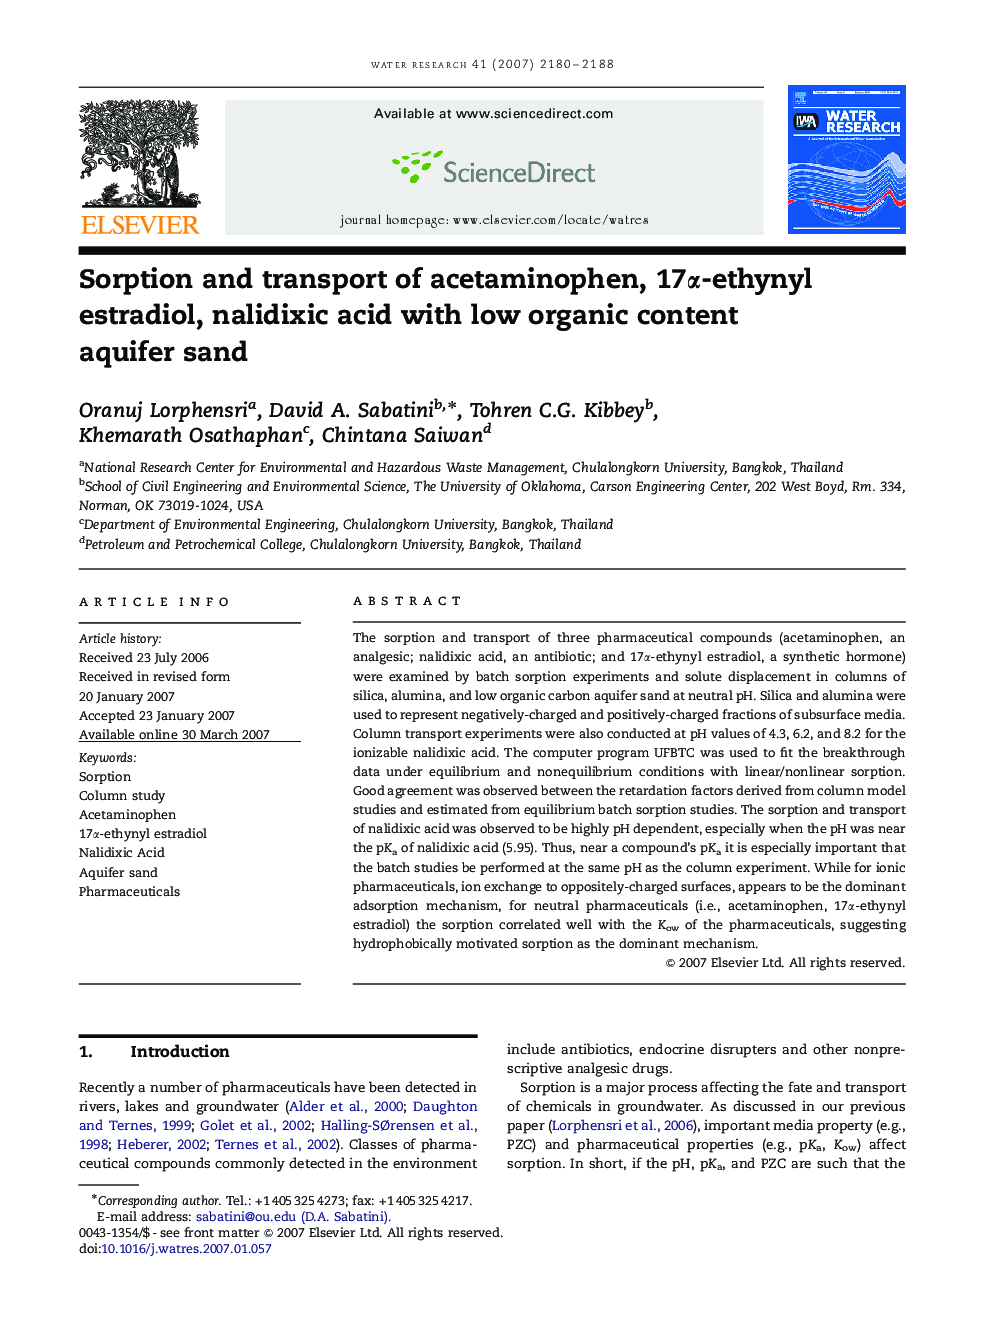 Sorption and transport of acetaminophen, 17α-ethynyl estradiol, nalidixic acid with low organic content aquifer sand